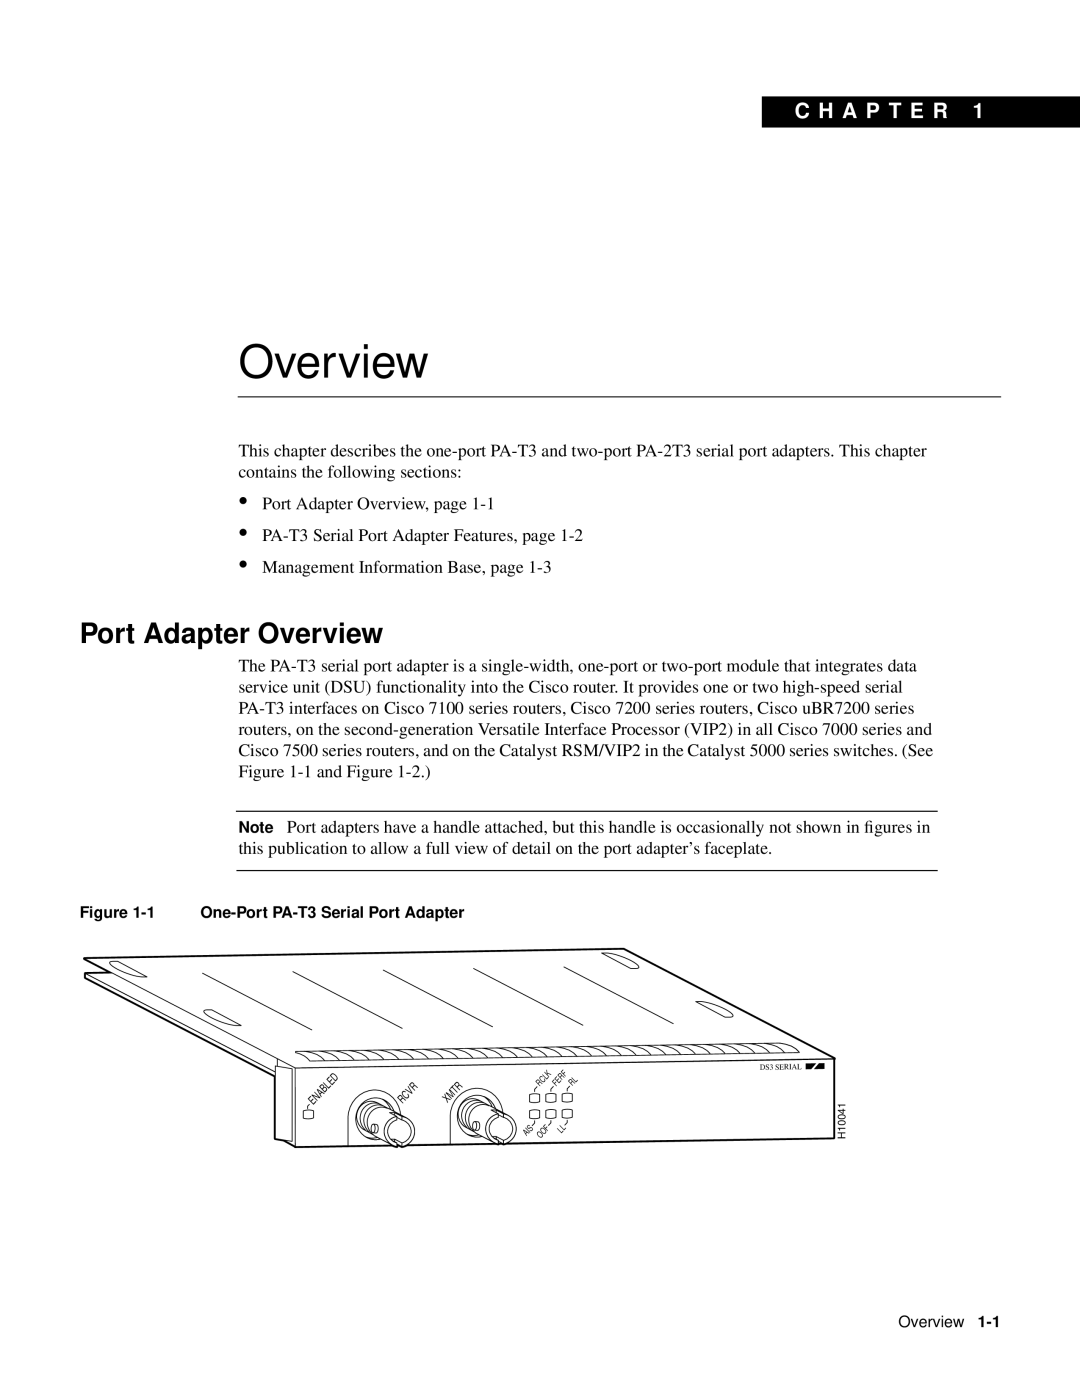 Cisco Systems PA-T3 manual Port Adapter Overview, C H A P T E R 